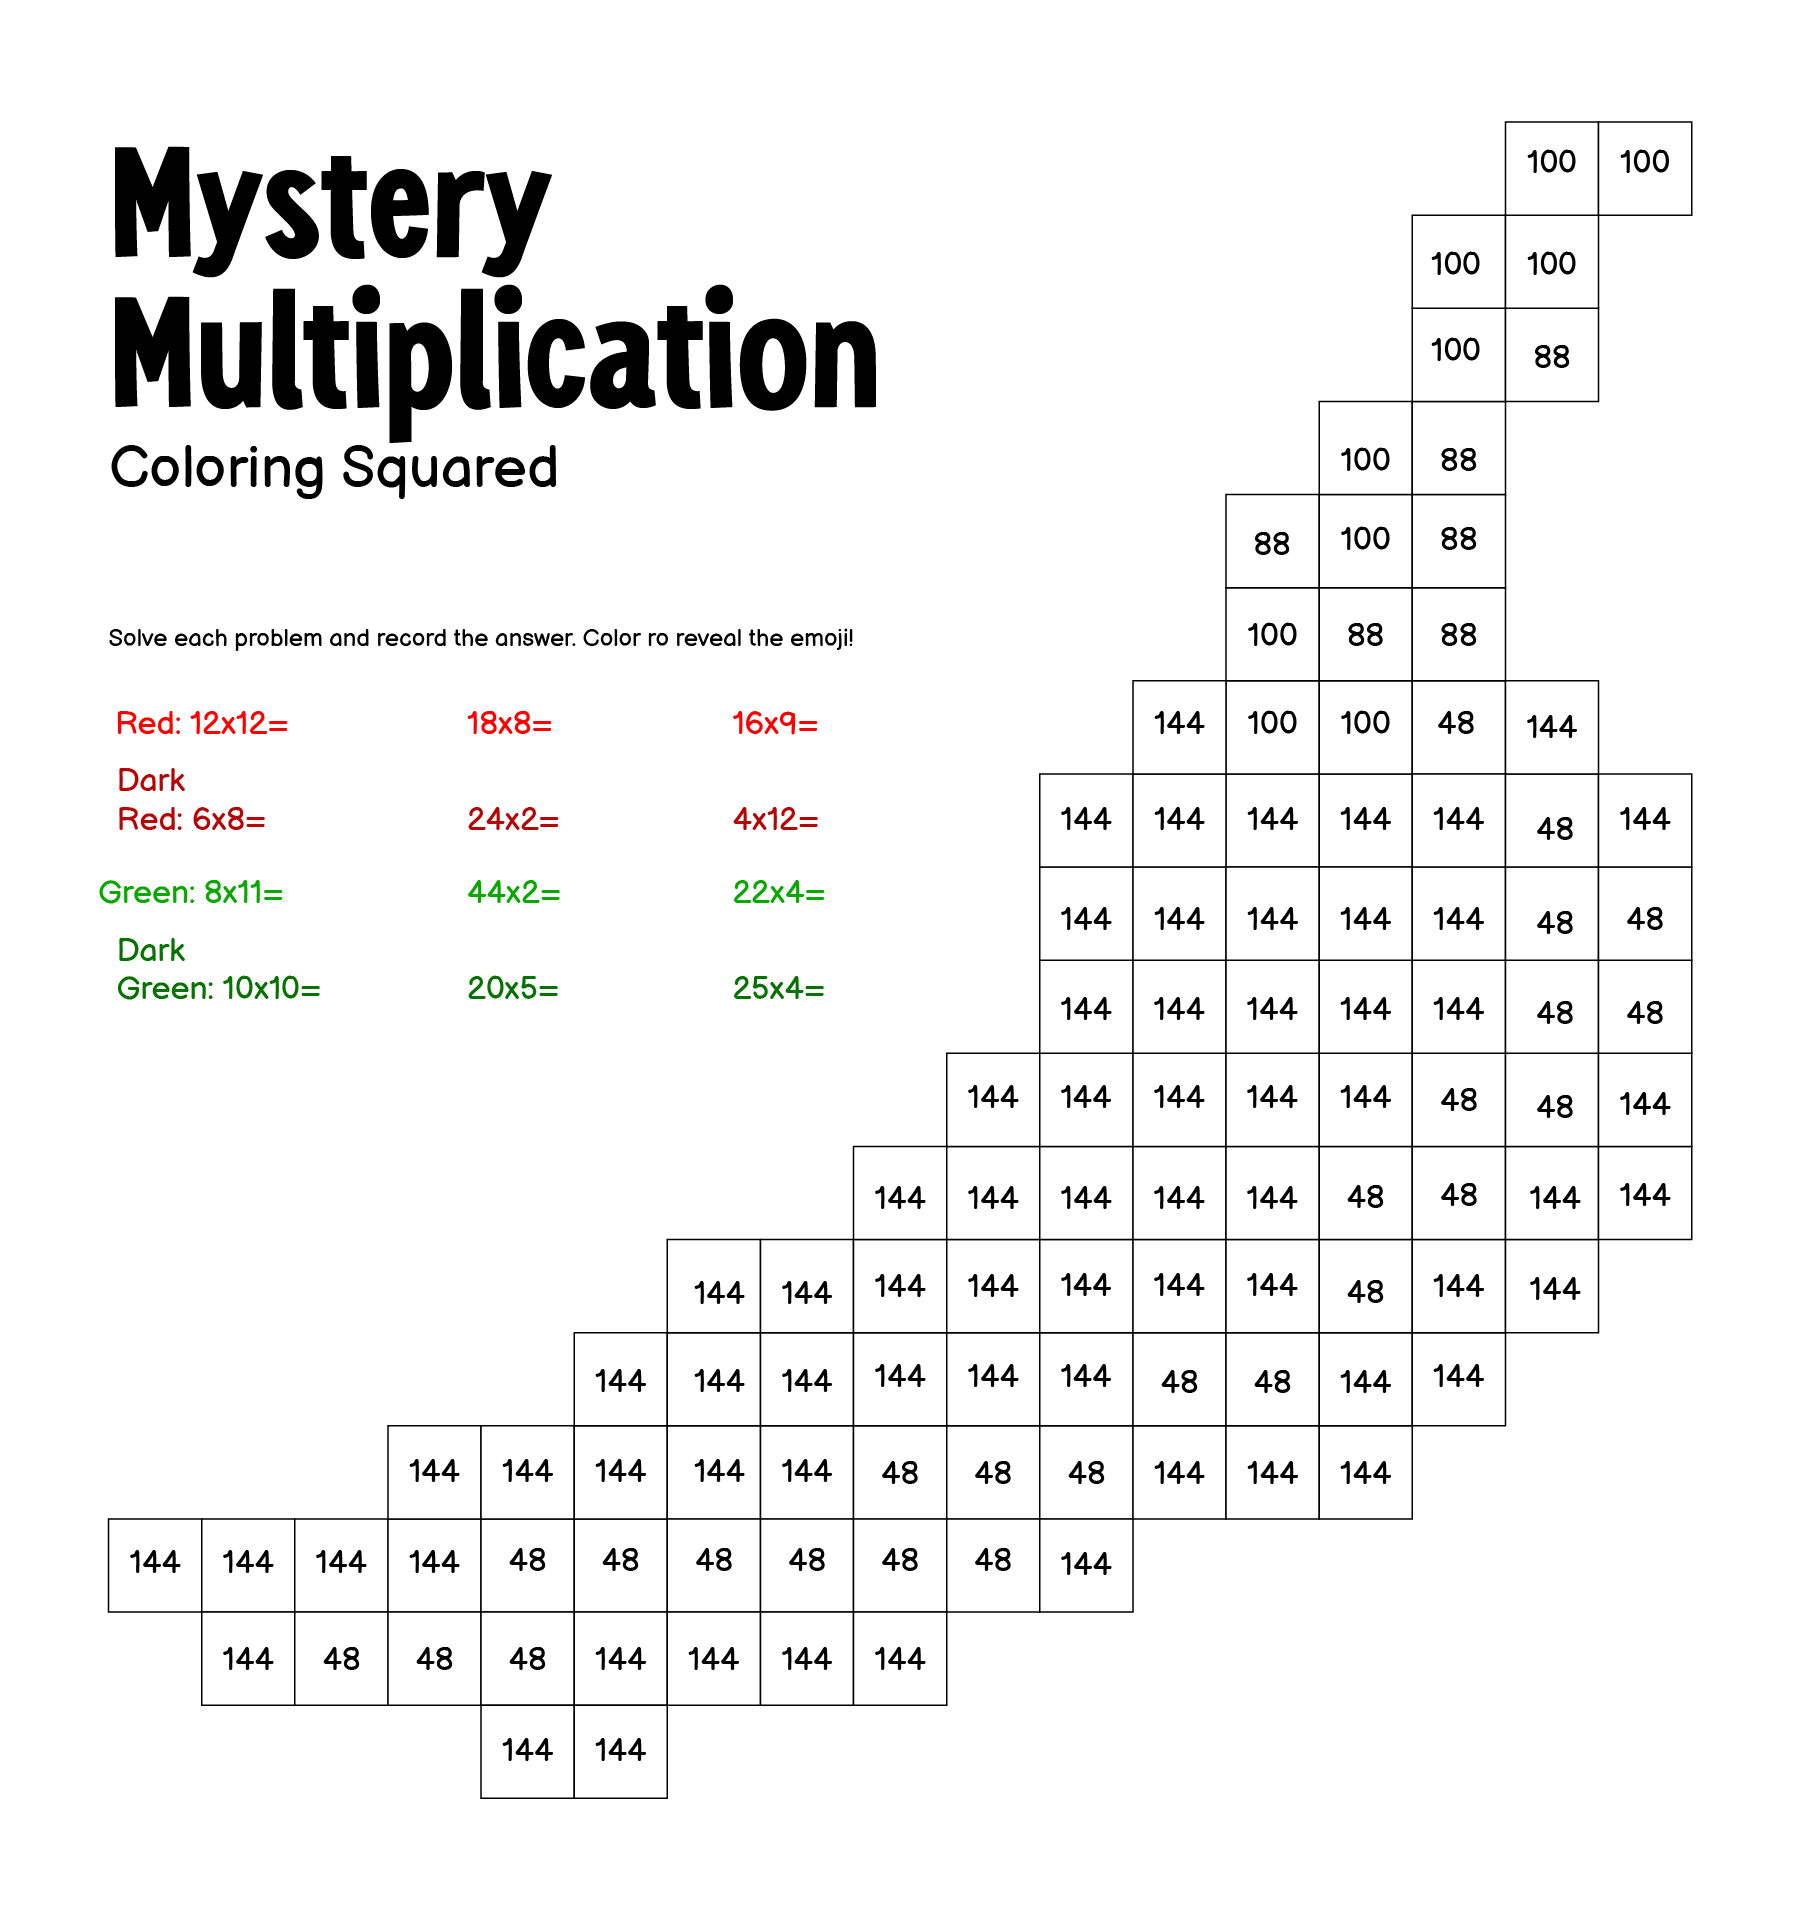 Mystery Multiplication Coloring Squared